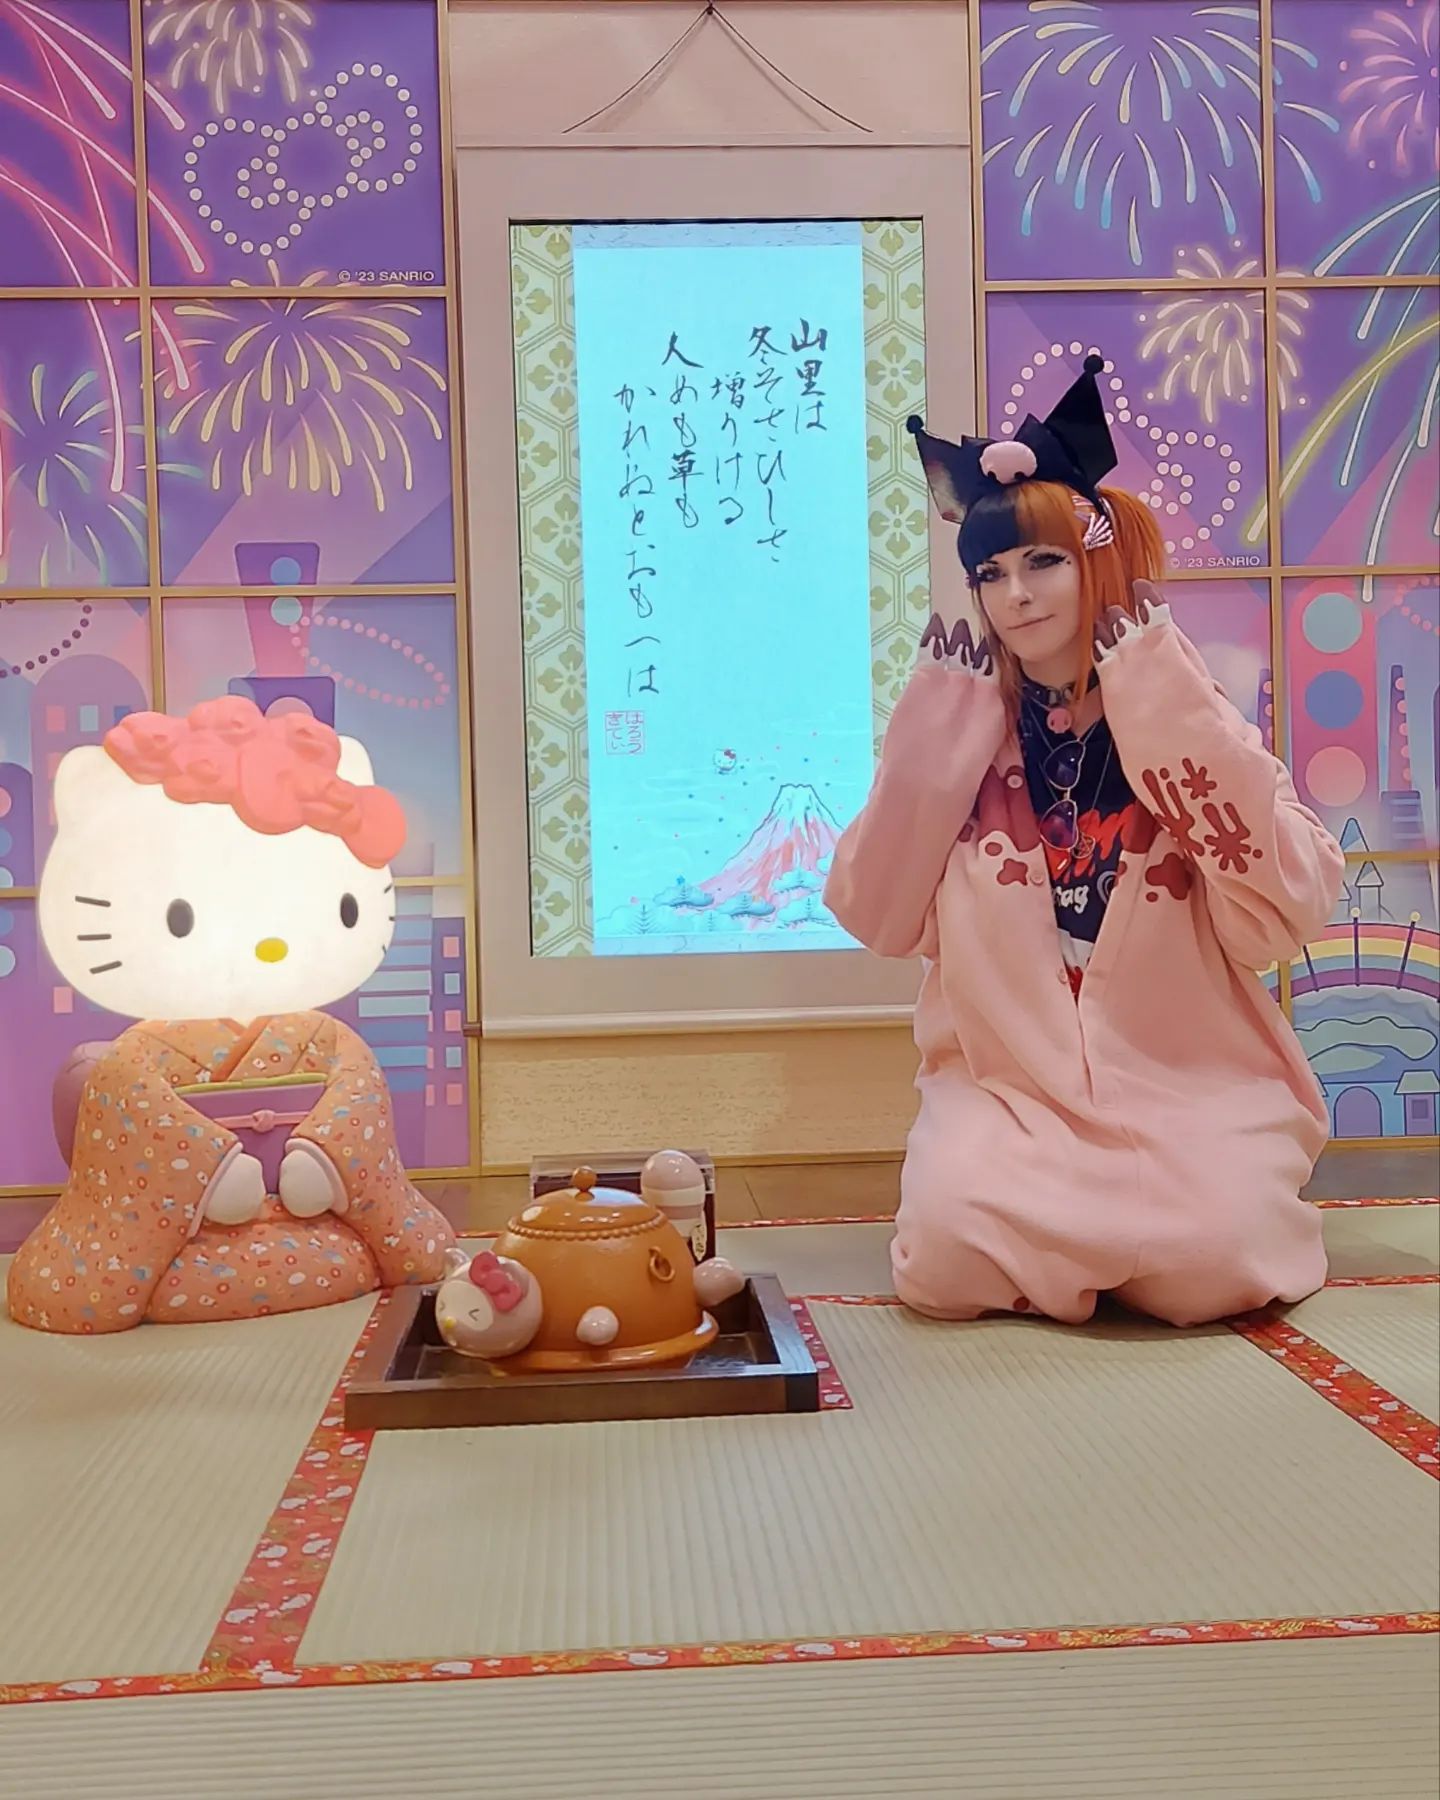 ✨️Happy New Year! ✨️
Spending it with Hello Kitty & Rilakkuma in their kimonos ♡ in my Gloomy Bear onesie from @hellokigurumi

2023 was overall a crappy year (Japan being the exception) and I don't expect 2024 to be any better especially with the 7.6 Magnitude earthquake Japan was hit with right on January 1st, followed by the Plane collision on the 2nd which had emergency supplies FOR the earthquake survivors. Talk about a bad omen for the new year. 

If you'd like to help the relief fundraiser, there is a link on @joey.the.anime.man YT channel: 

https://youtu.be/gioFHhXe2Fs?si=MJsmPLsM-lGGPkzF

Unfortunately, the Canadian government no longer allows sharing links regarding global media (yay censorship), so please go see his video regarding the donation links. 

I'm hoping everyone else had a much happier start to 2024, and I hope it continues that way! 

#happynewyear #newyear #2024 #japan #sanriopuroland
#sanrio #hellokitty #rilakkuma #tokyo